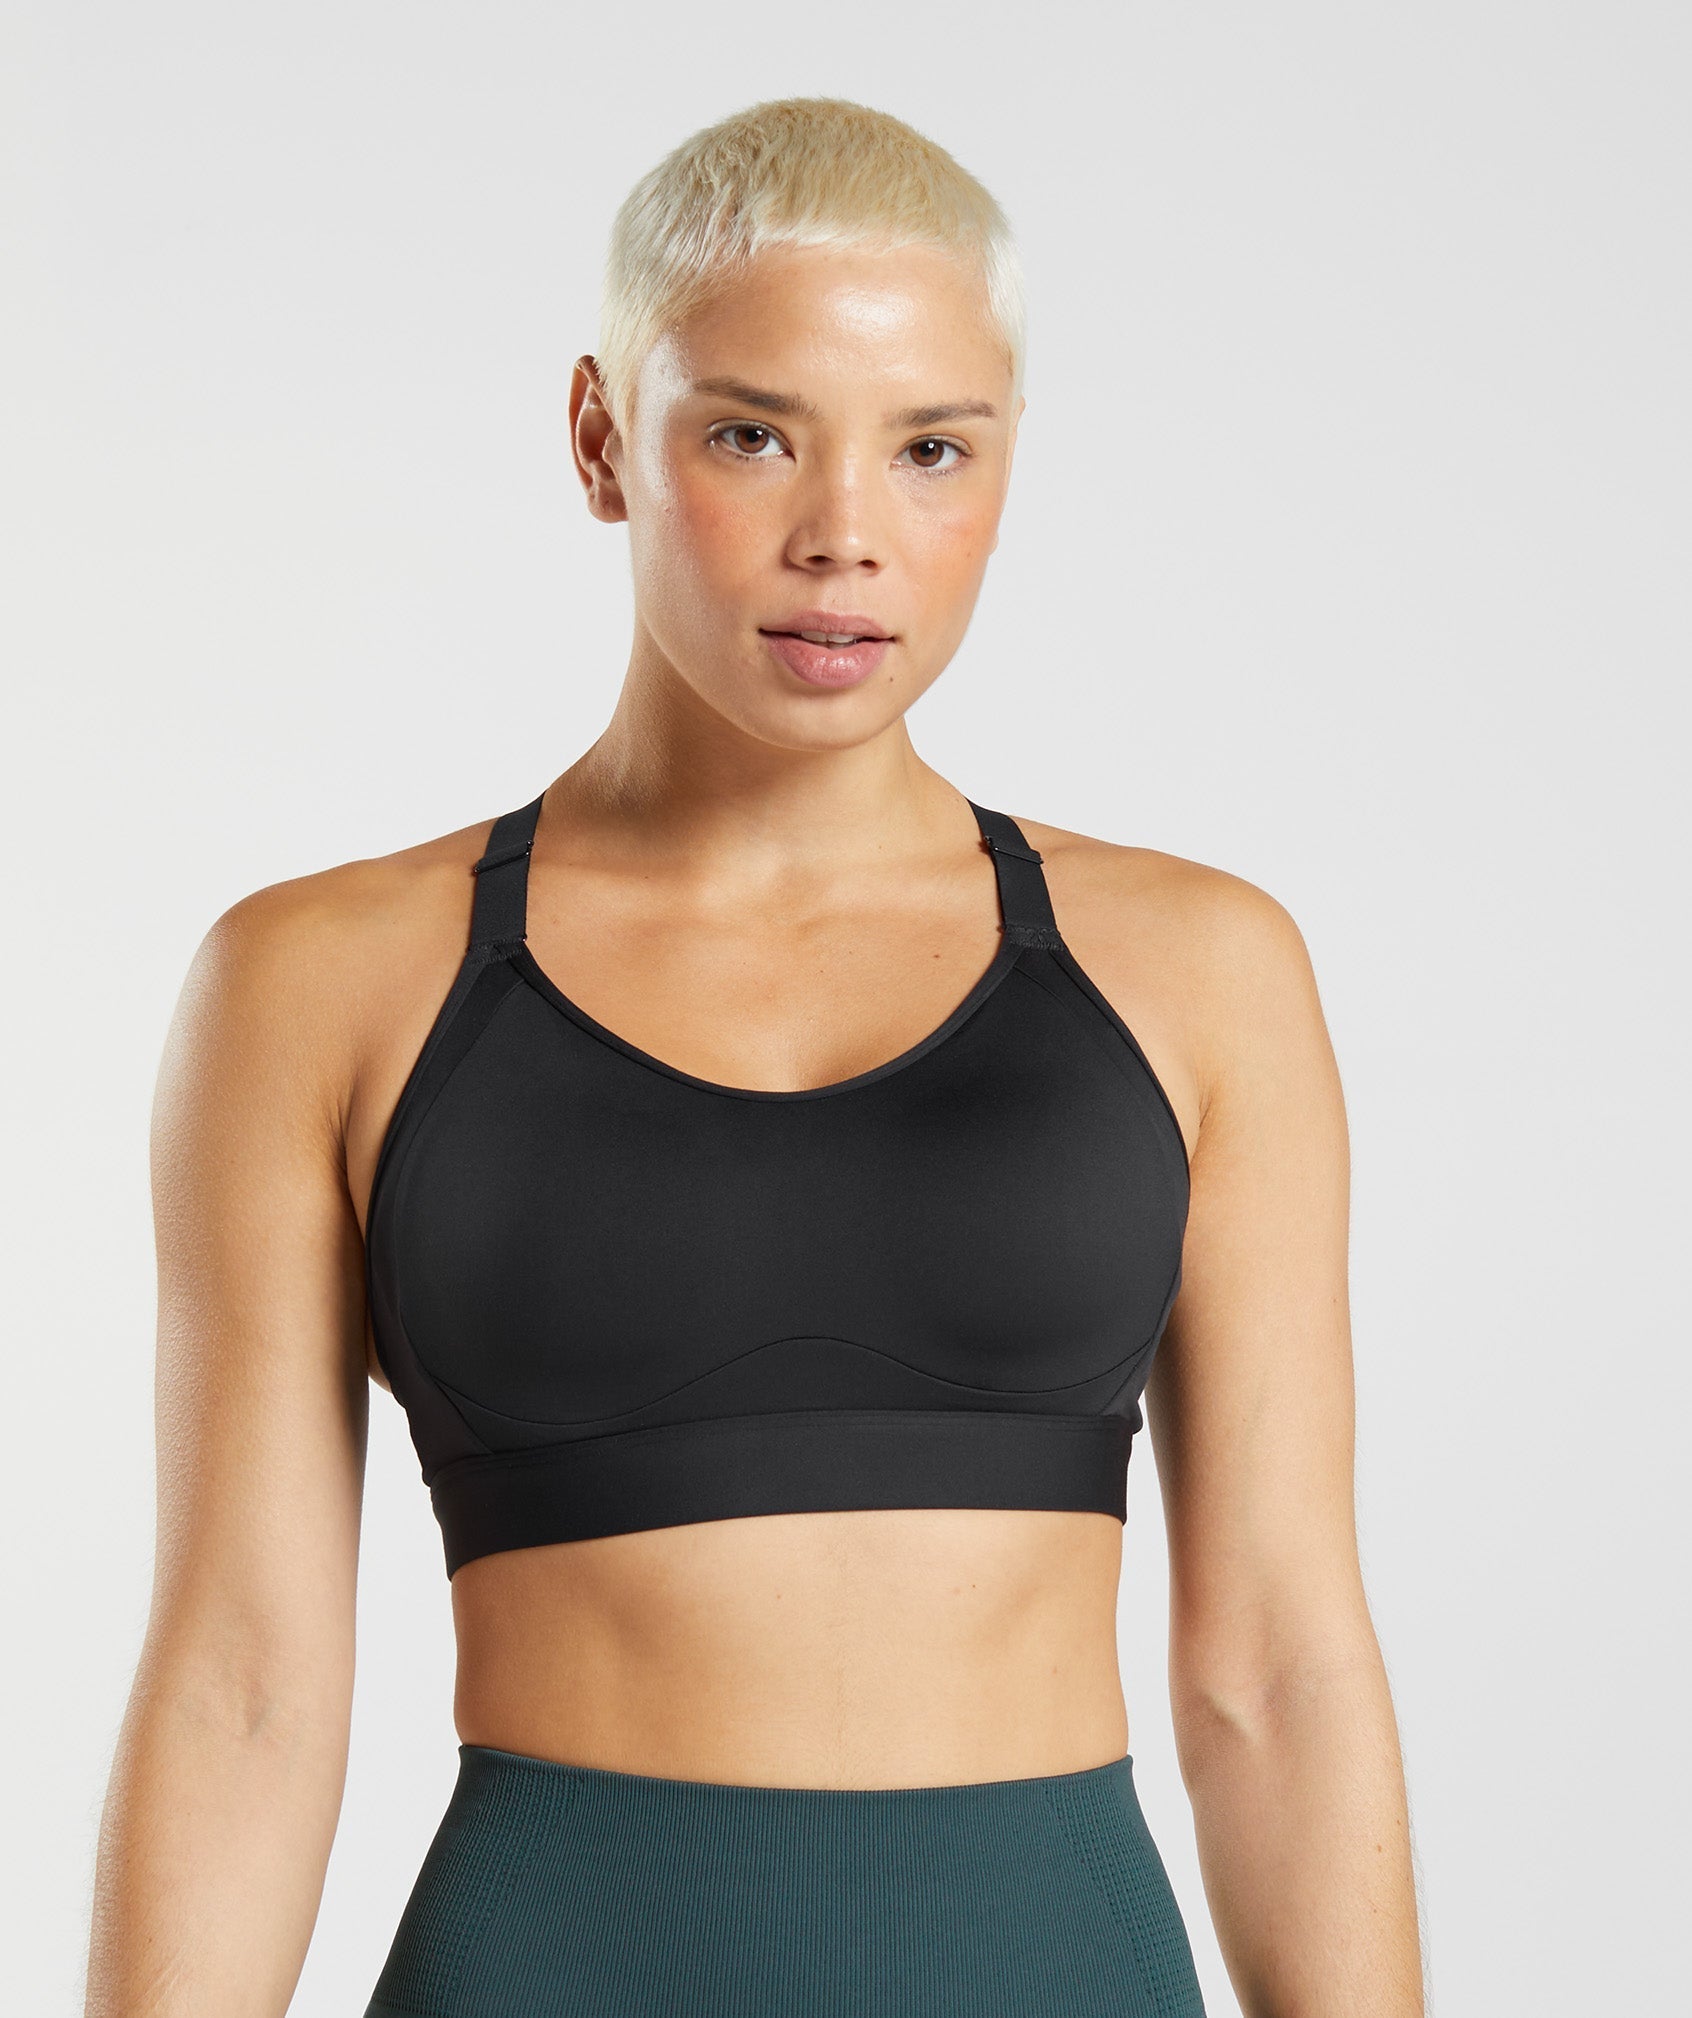  UOCUFY My Orders 2PC Sport Bras for Women High Support